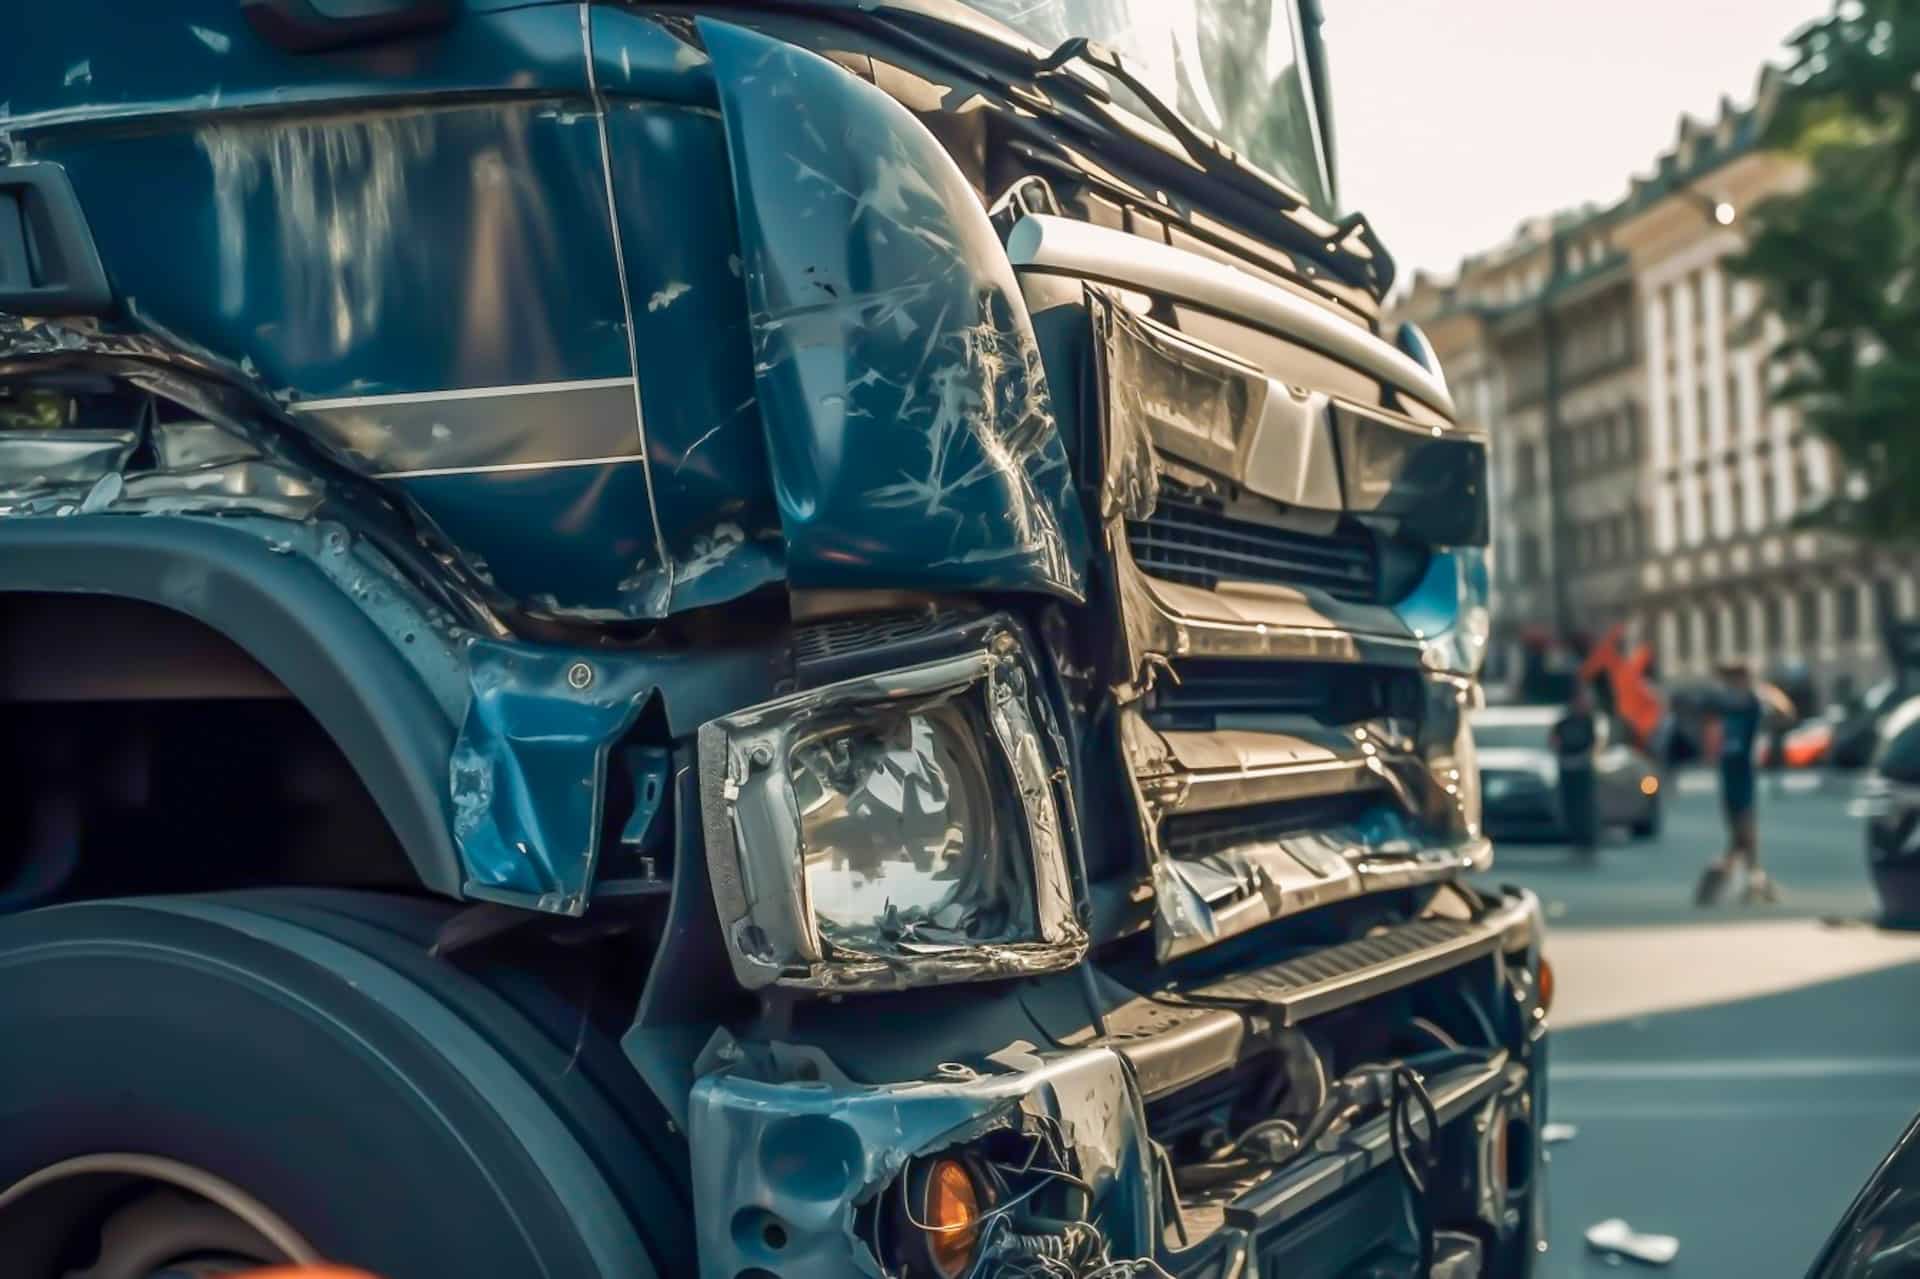 What-Legal-Steps-Should-You-Take-After-a-Truck-Collision-in-Vancouver